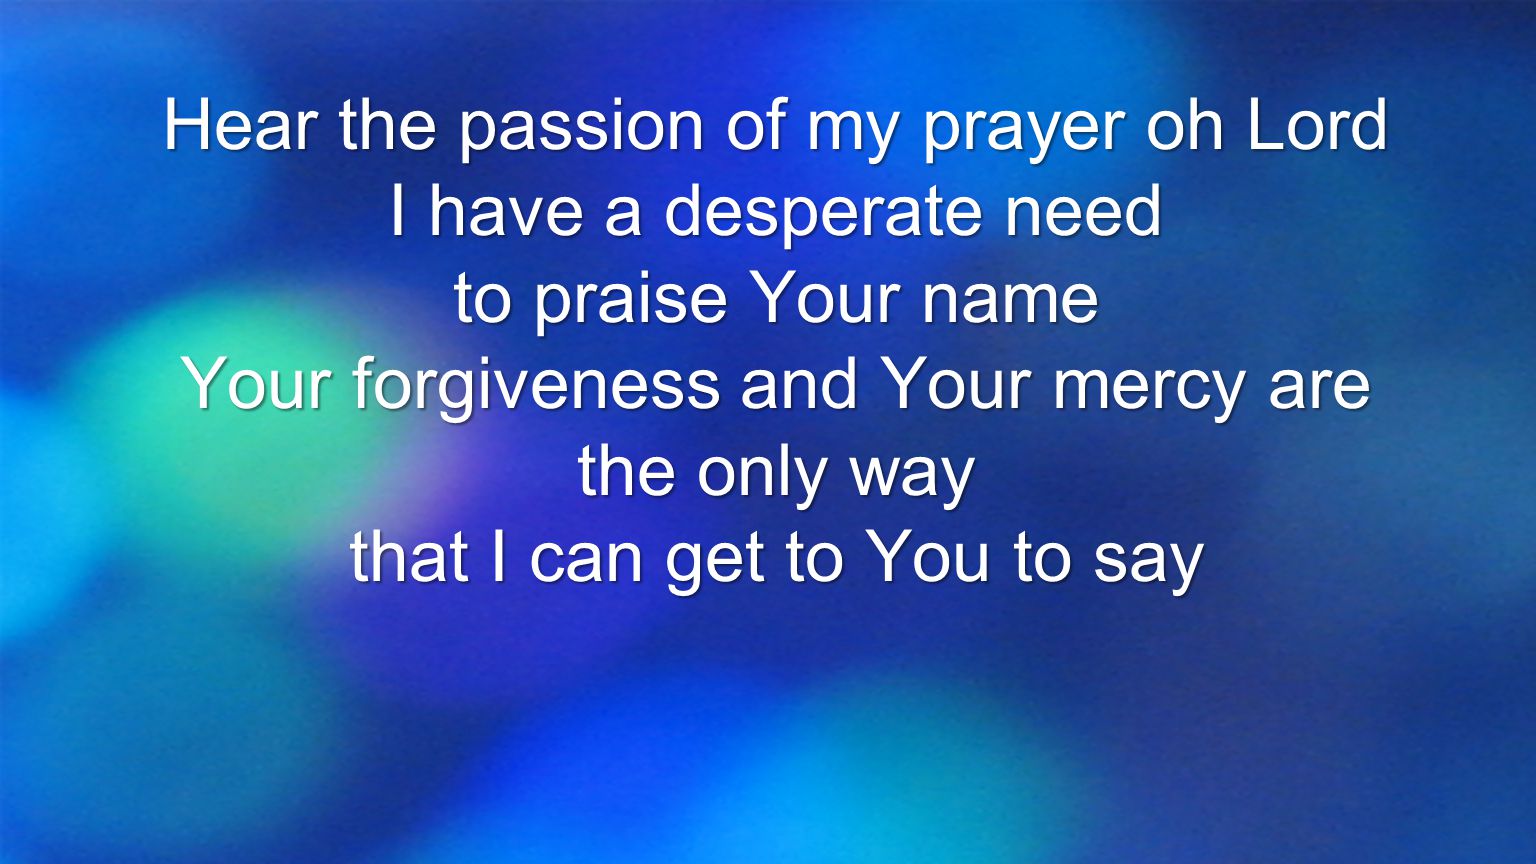 Hear the passion of my prayer oh Lord I have a desperate need